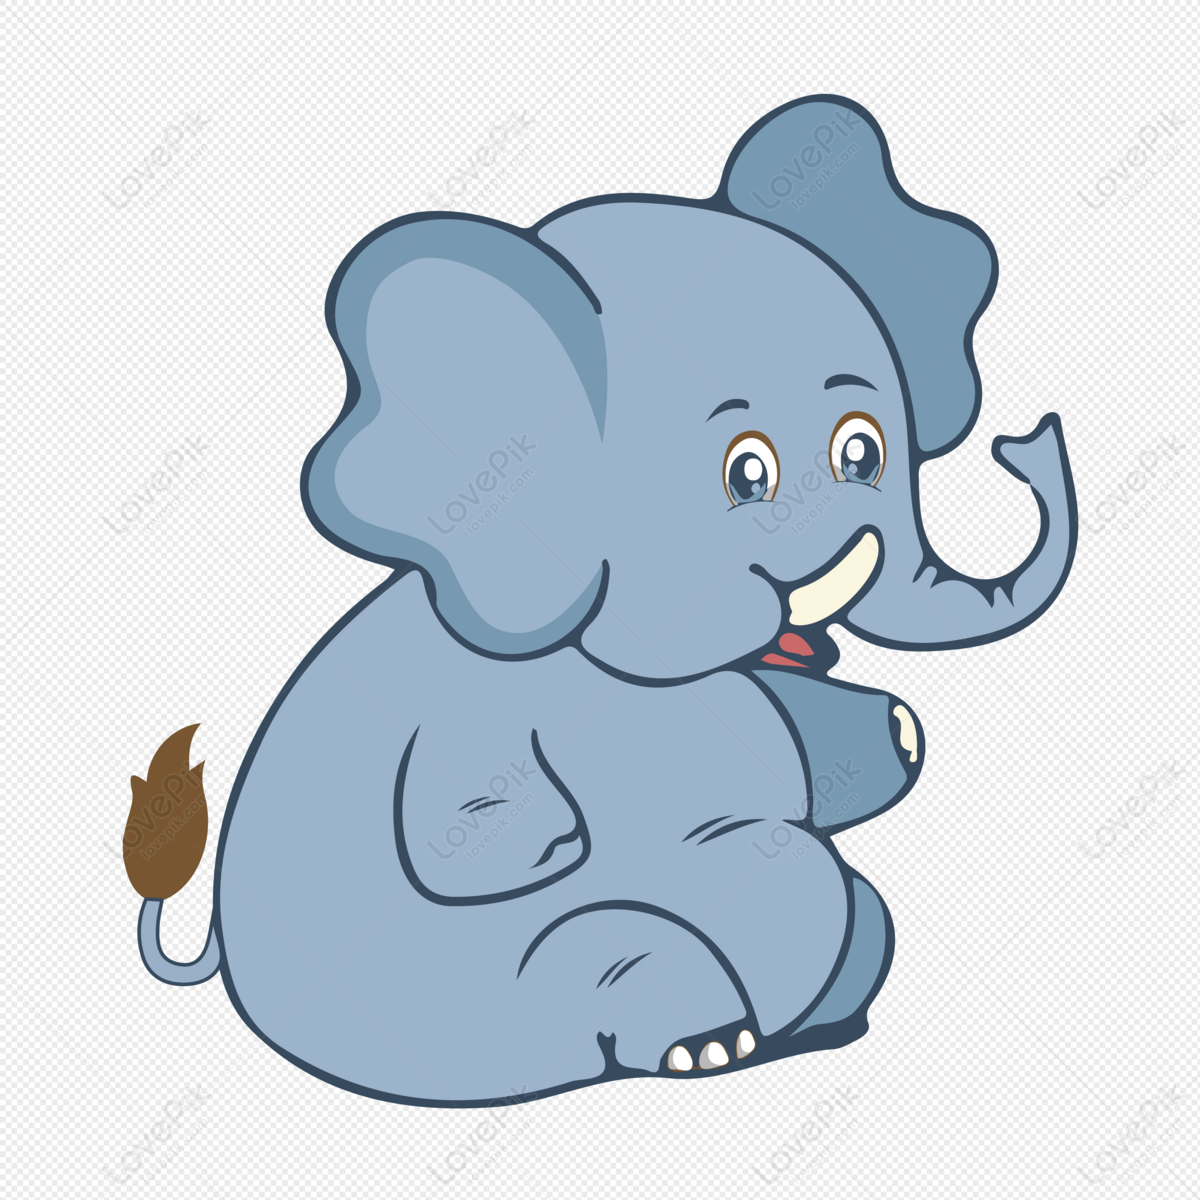 Hand Drawn Cartoon Elephant PNG Picture And Clipart Image For Free Download  - Lovepik | 401312745